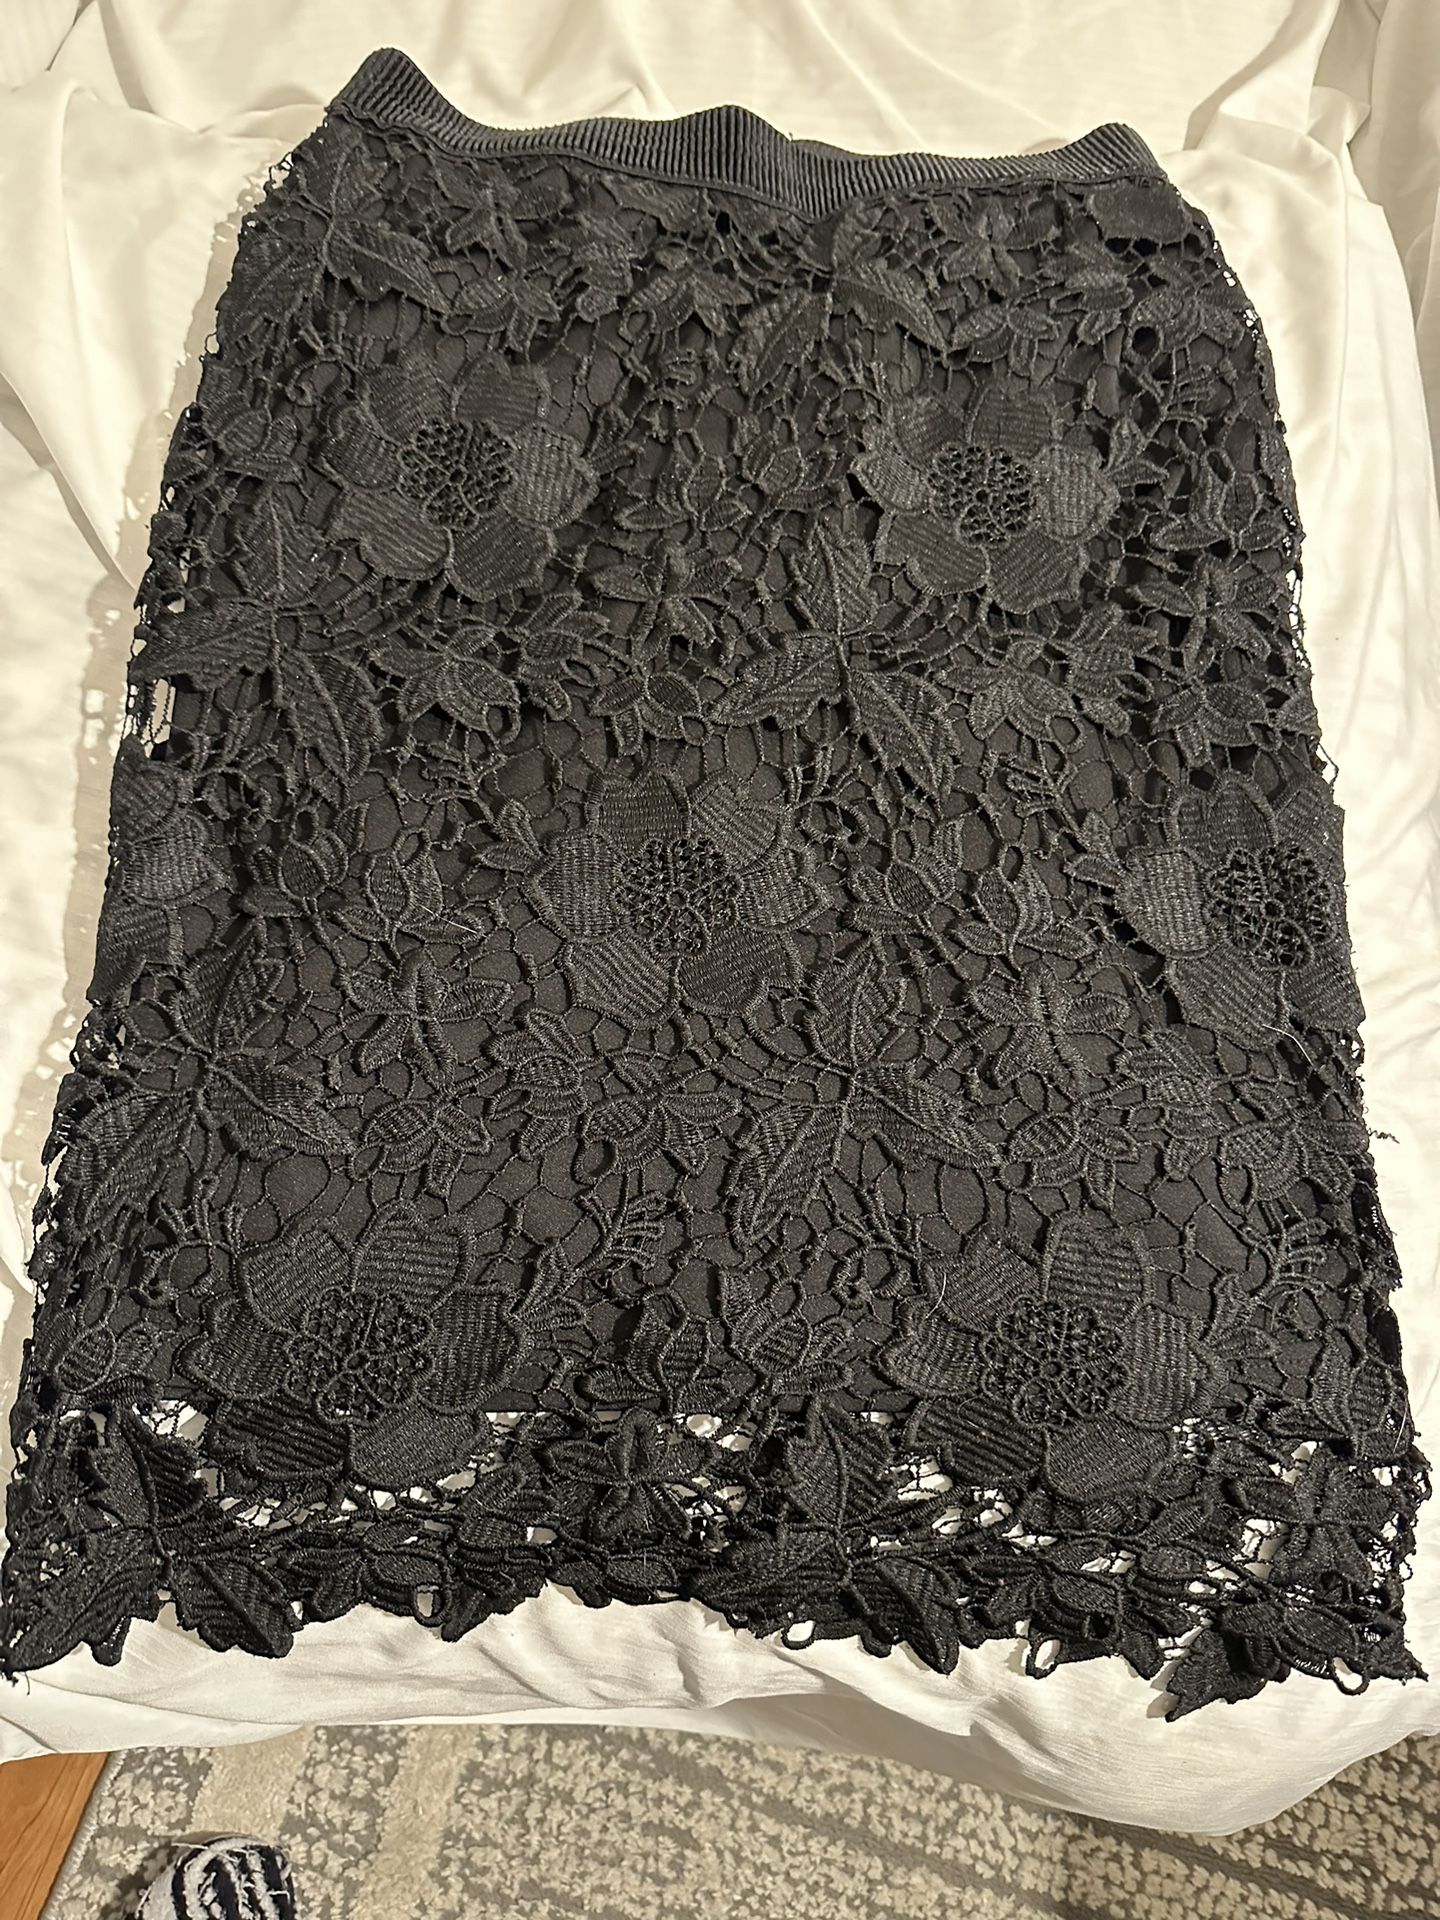 Women’s Black Lace Skirt - Partially Lined -Size Medium 